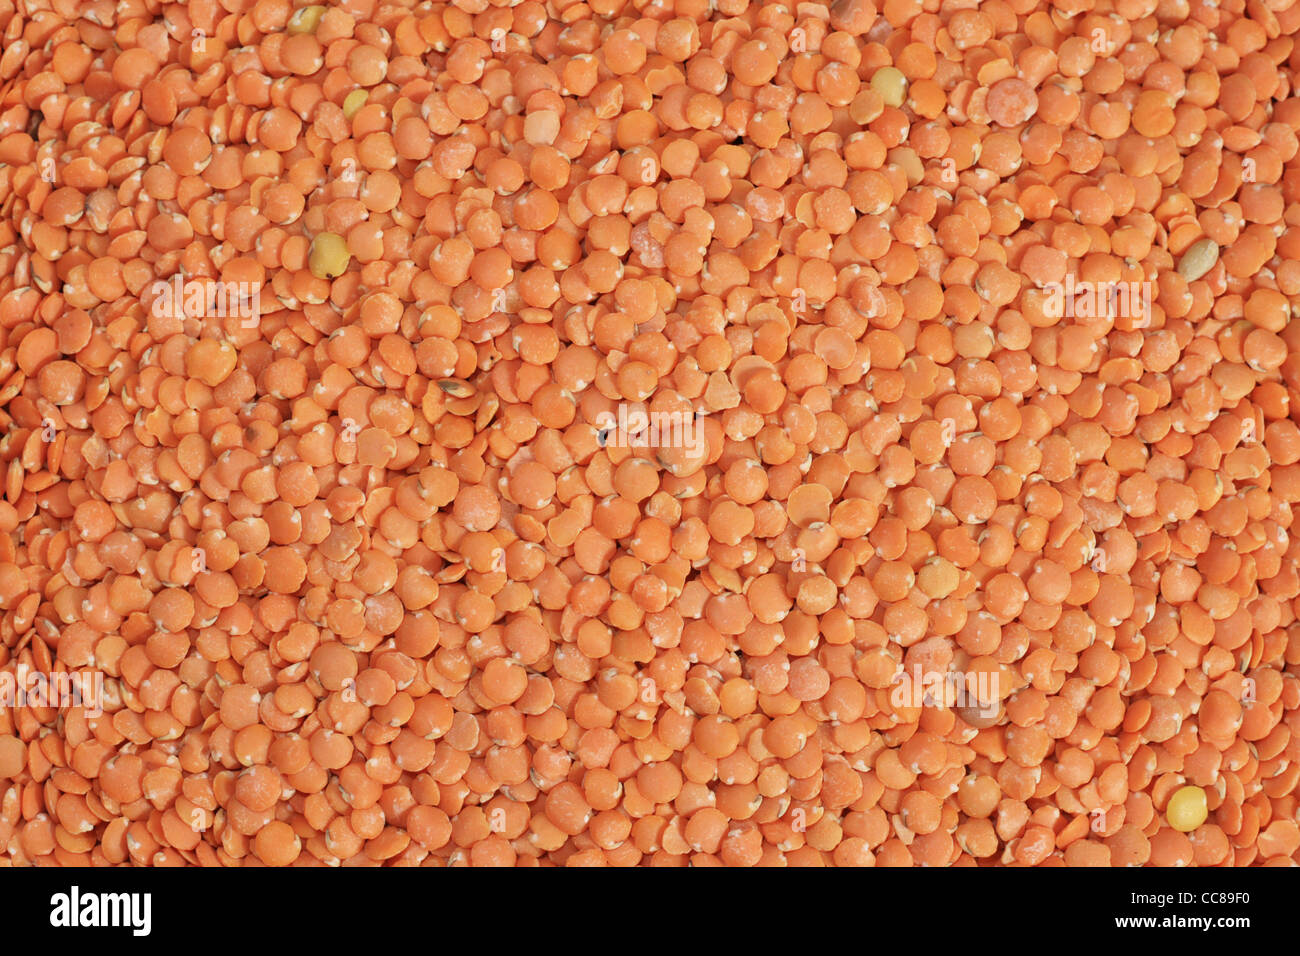 background of dried red lentils or daal Stock Photo